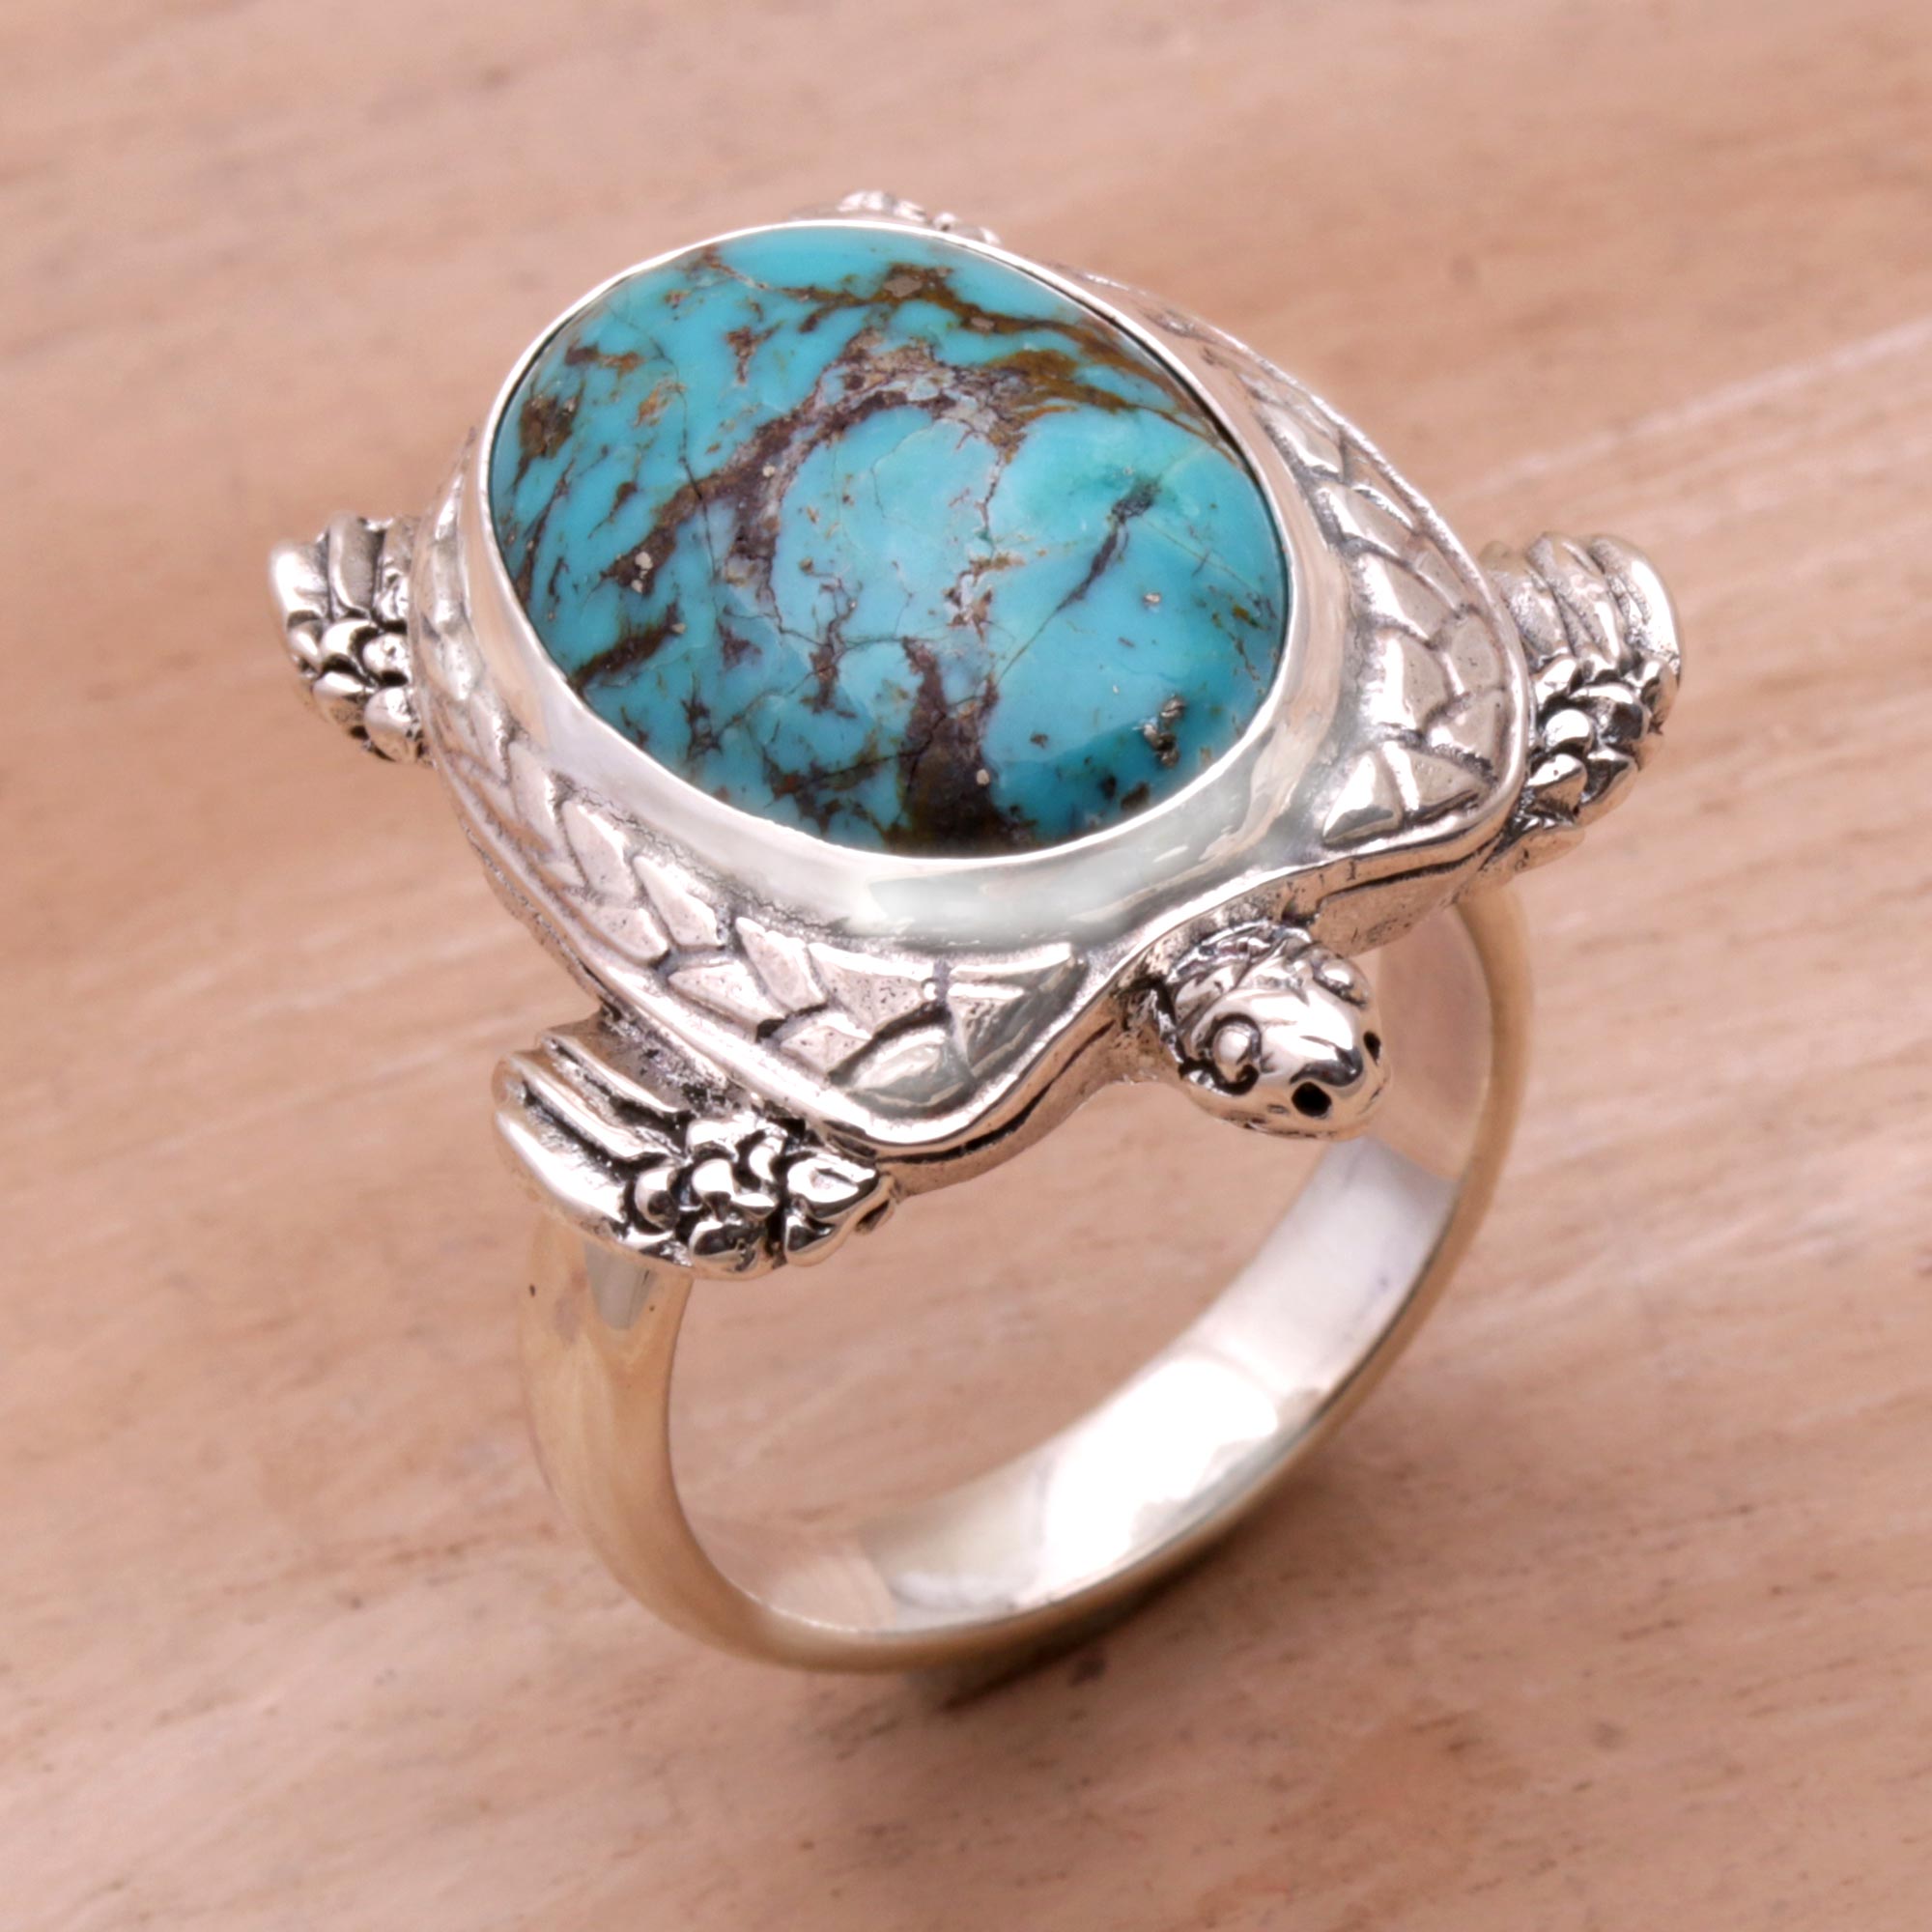 NOVICA Chelonia Turtle Men's Sterling Silver And Reconstituted Turquoise Ring - 7